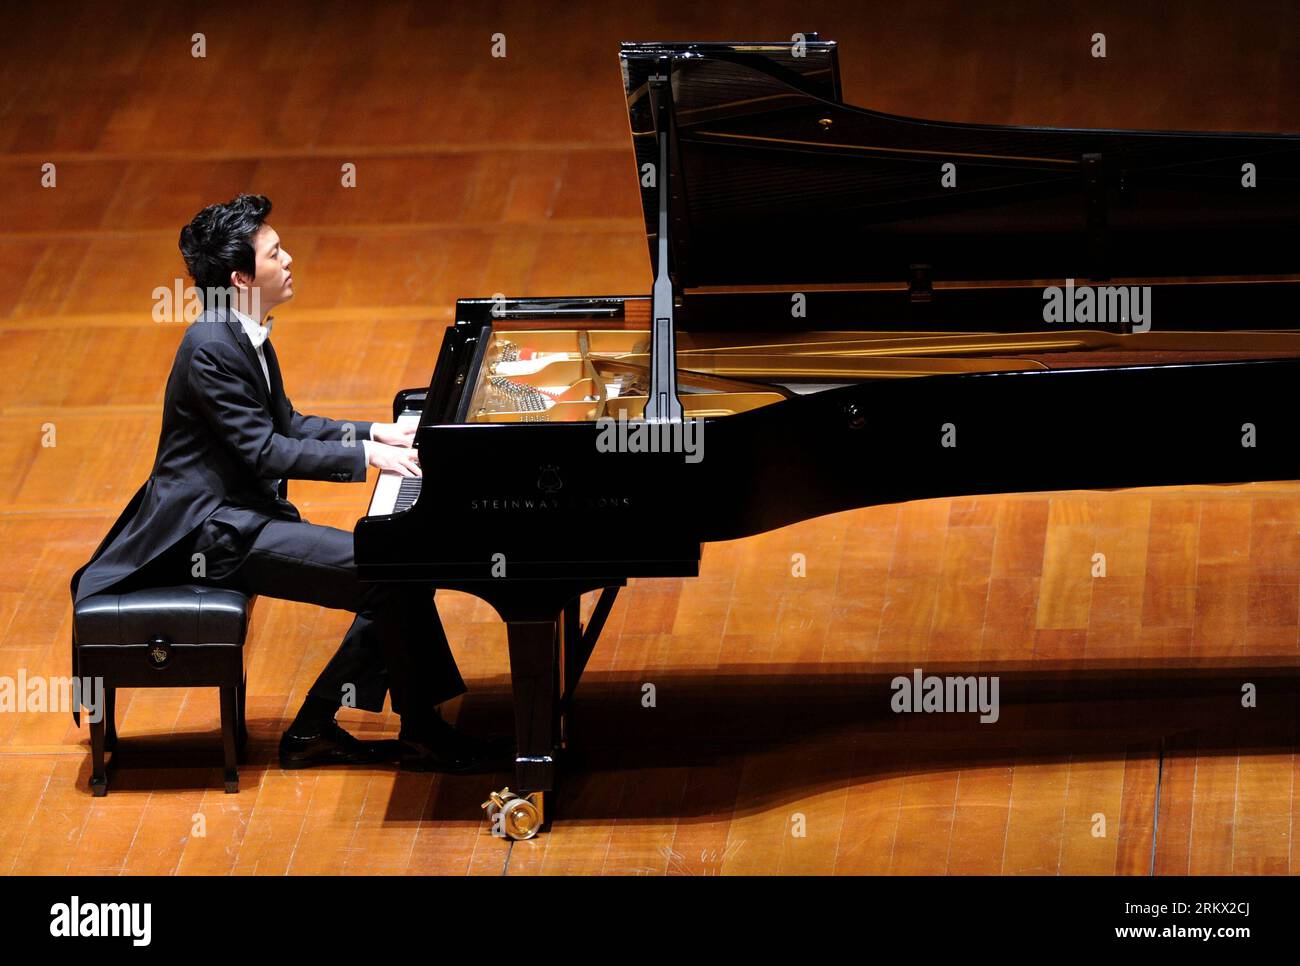 Forest of Piano, Multi-Audio Clip: Champing to Play Chopin